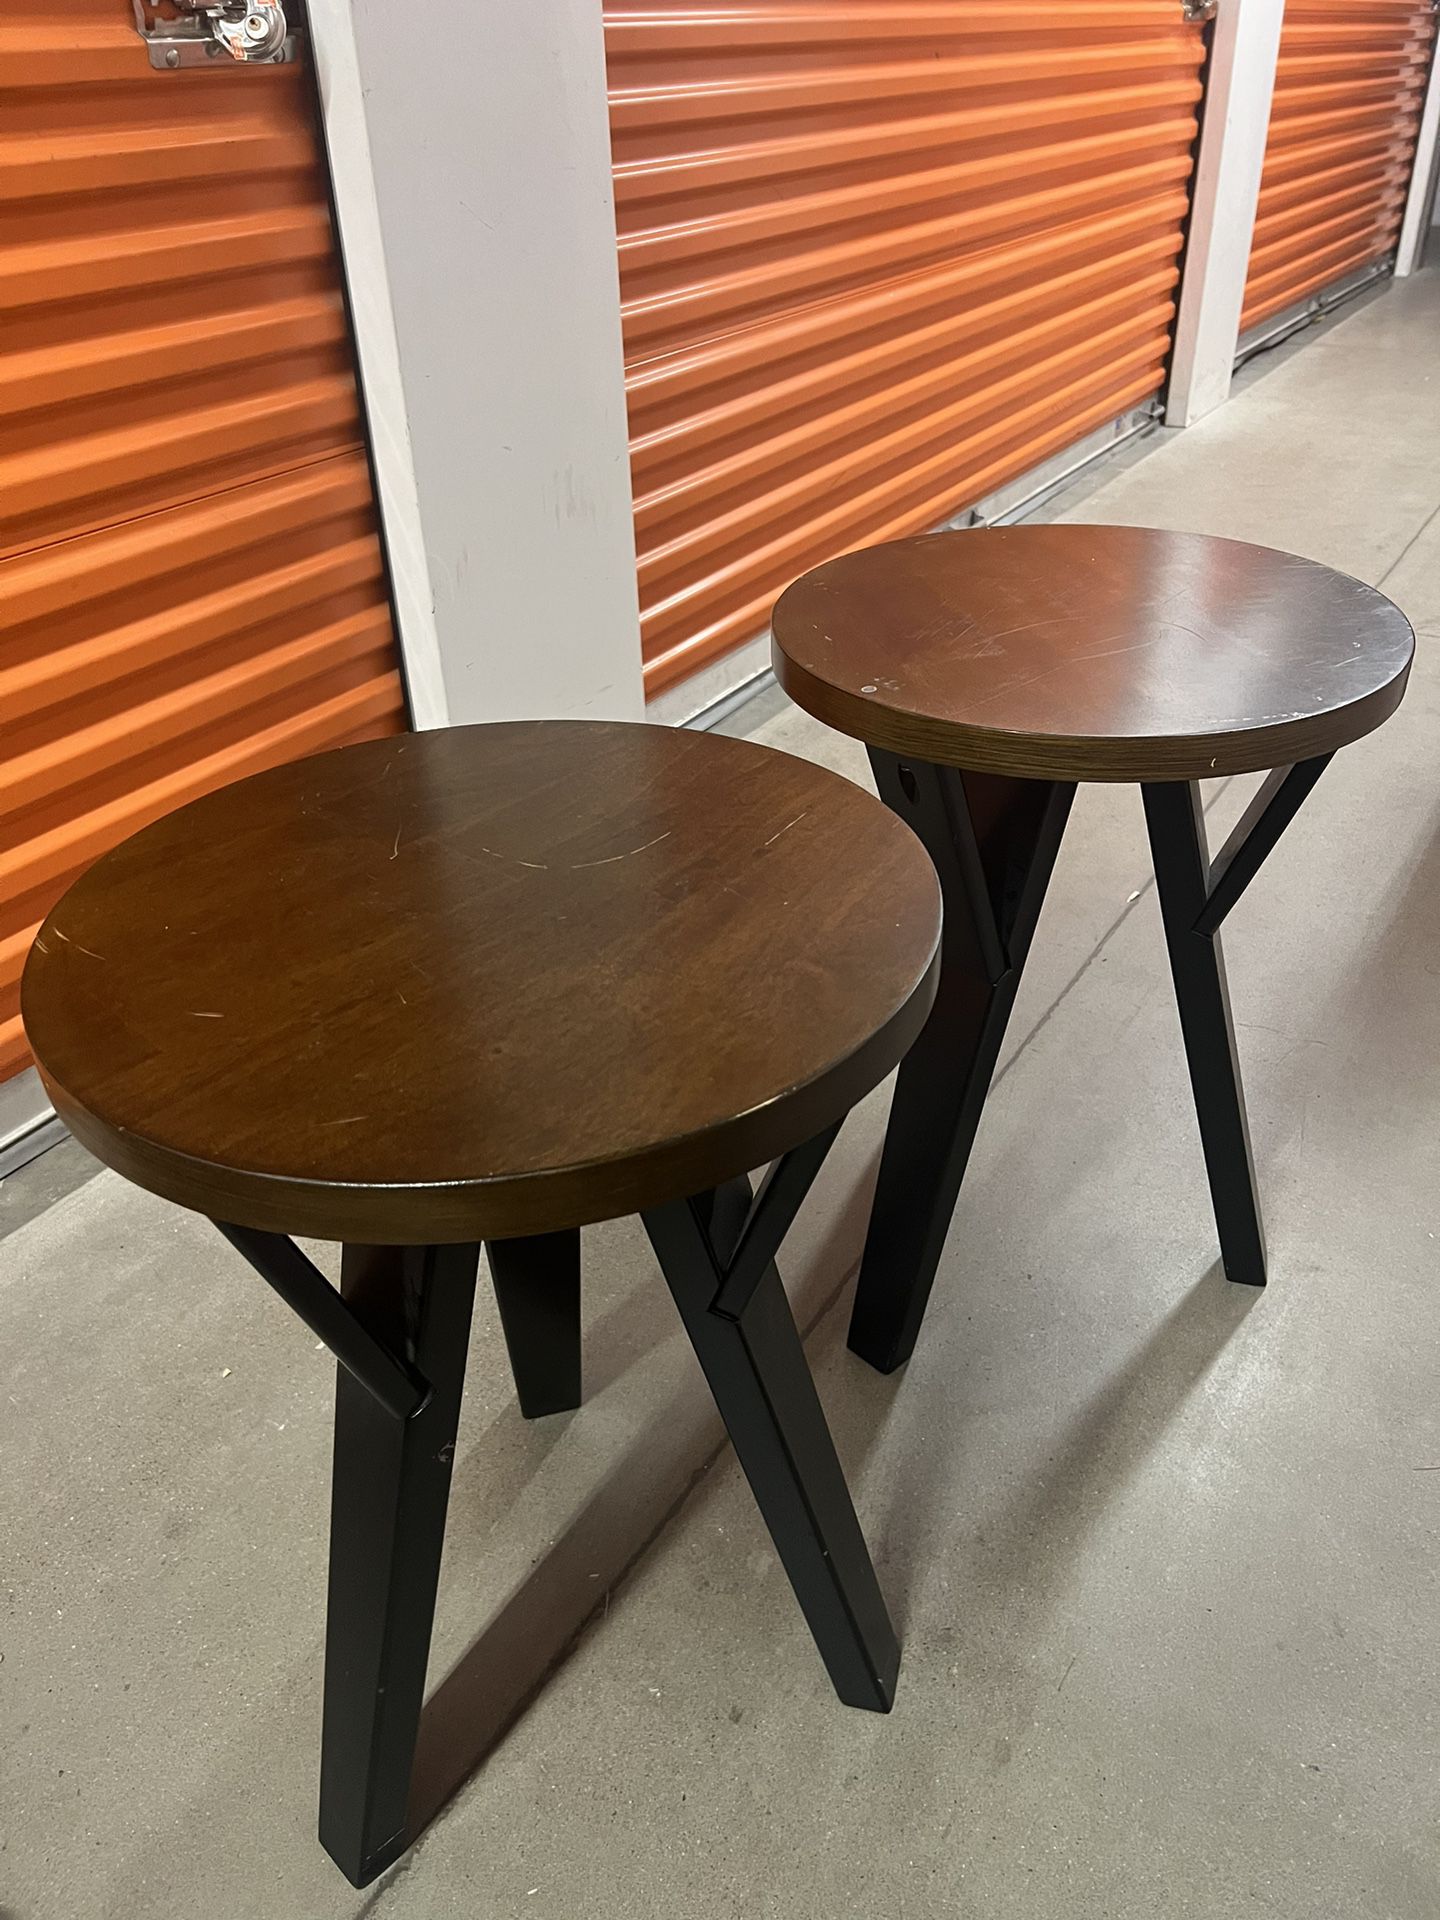 Two Small Tables 